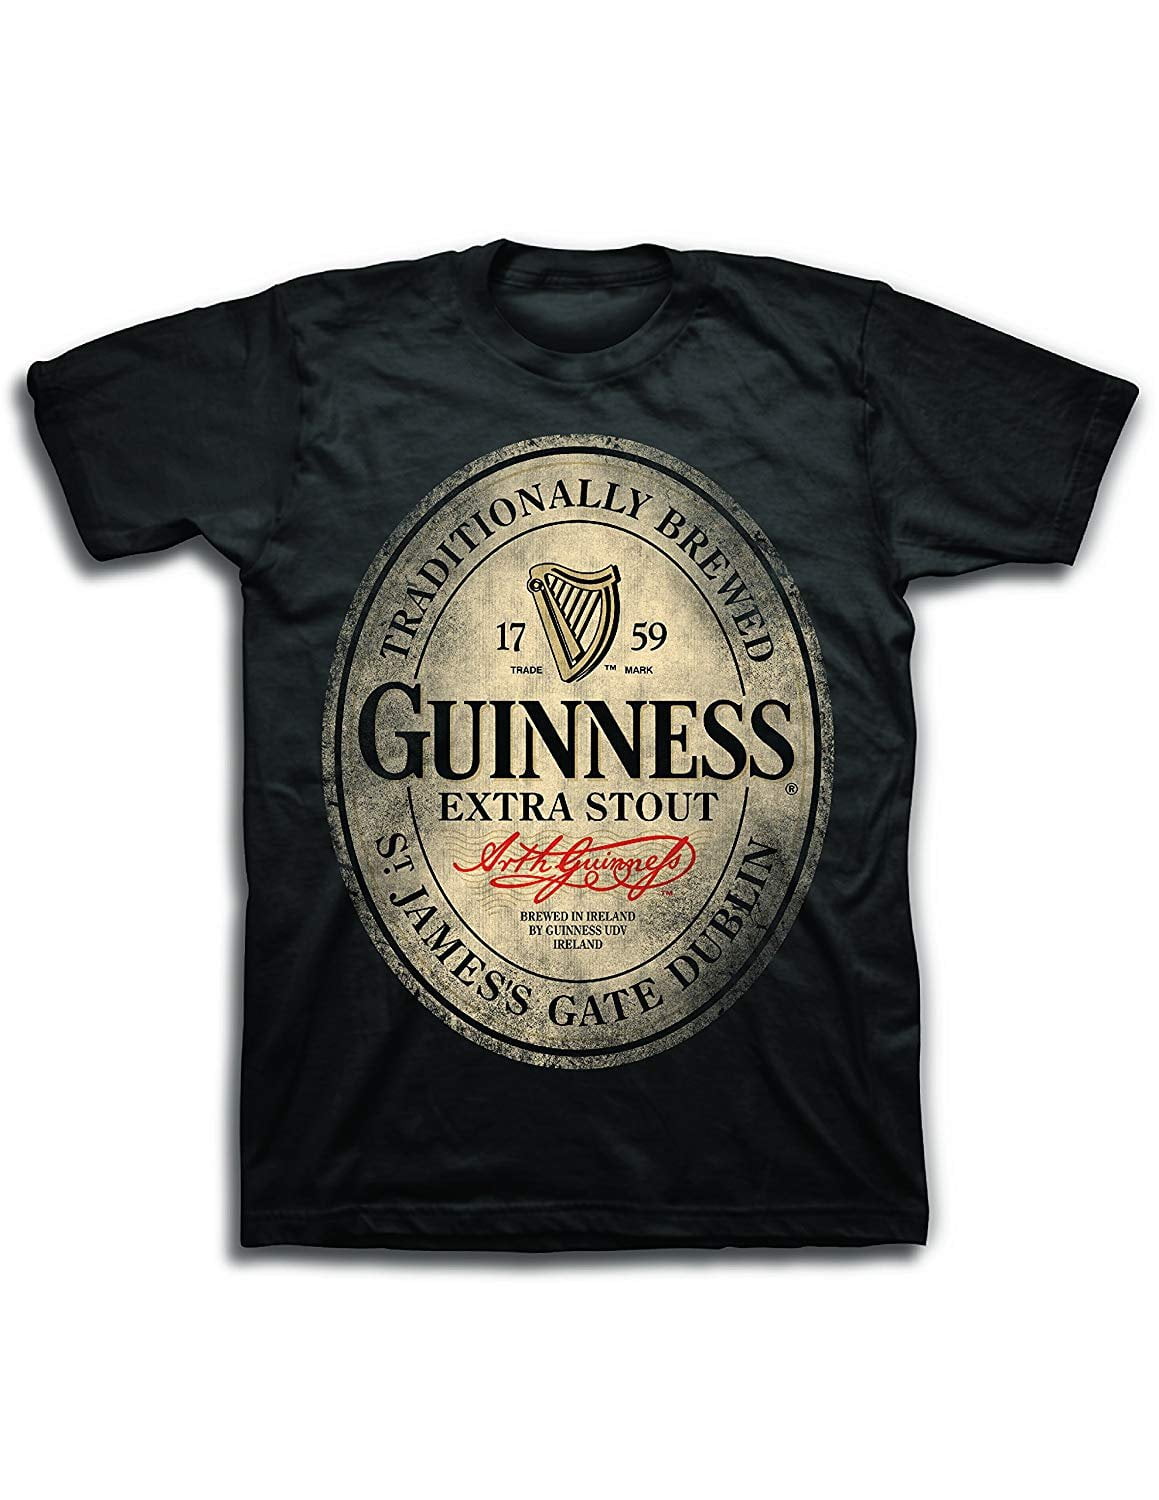 Guinness T-shirt Size Large 